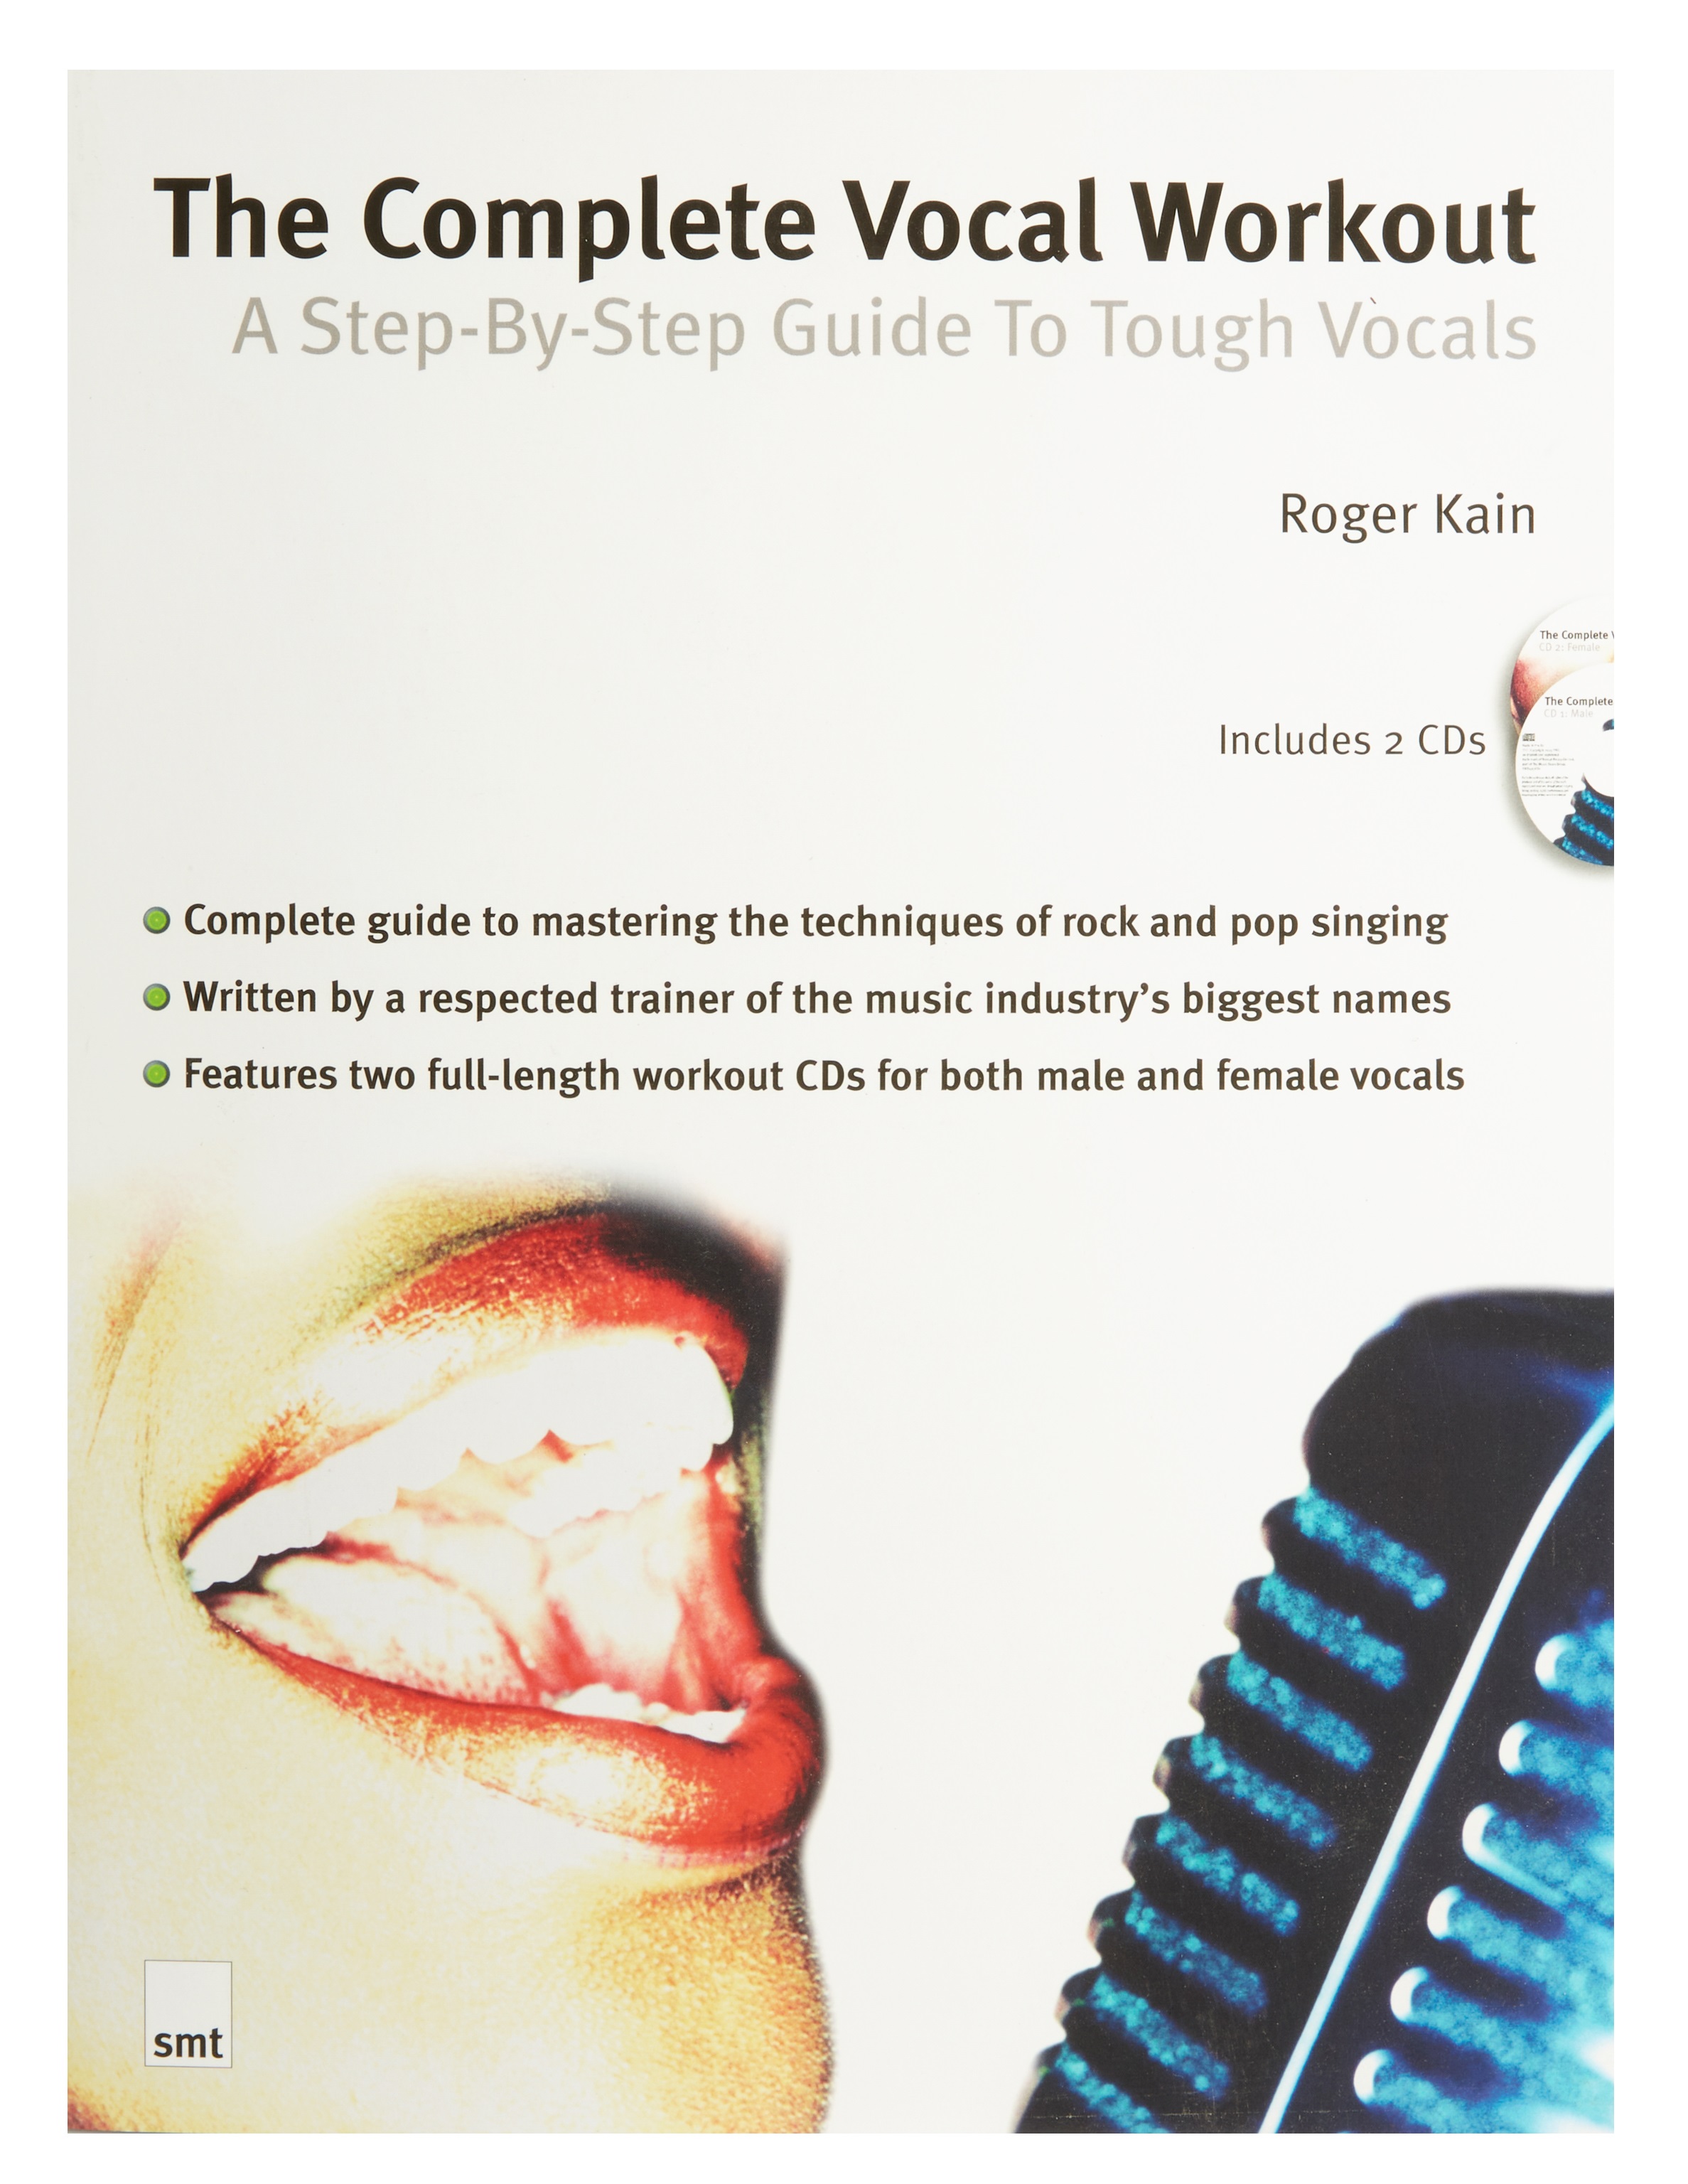 MS The Complete Vocal Workout: A Step-By-Step Guide To Tough Vocals